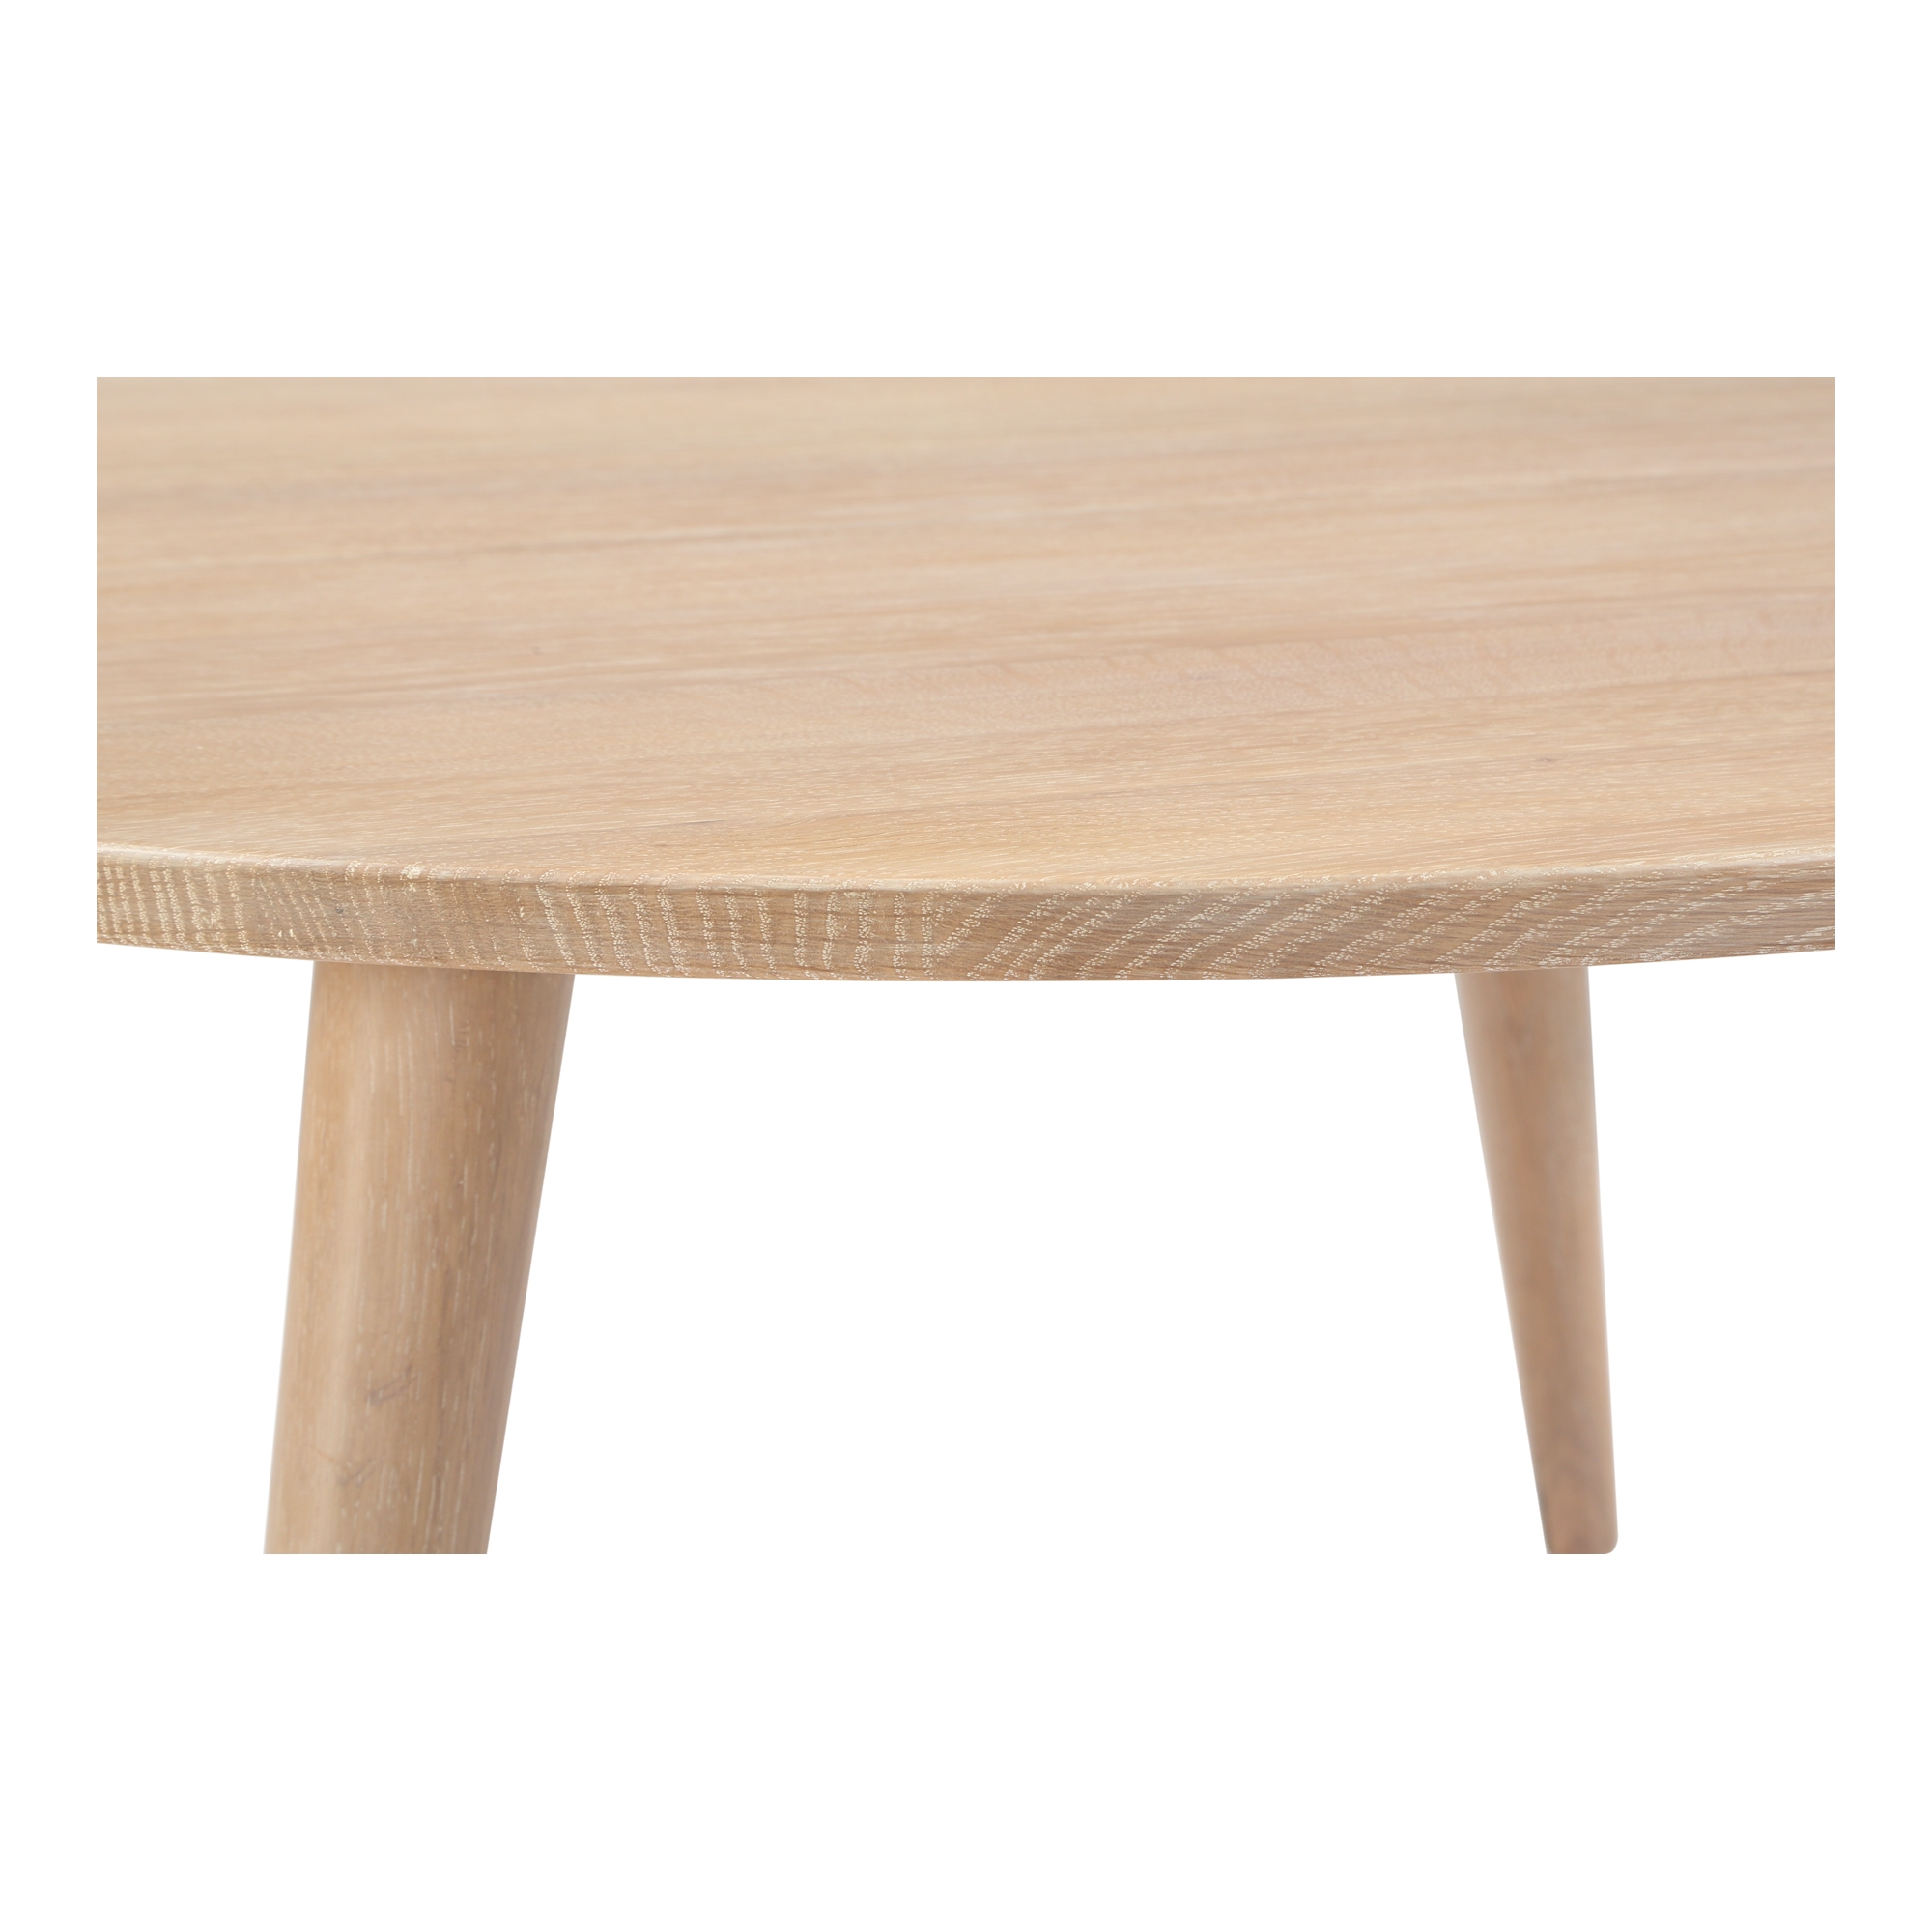 Ariano Coffee Table Brown - Image 2